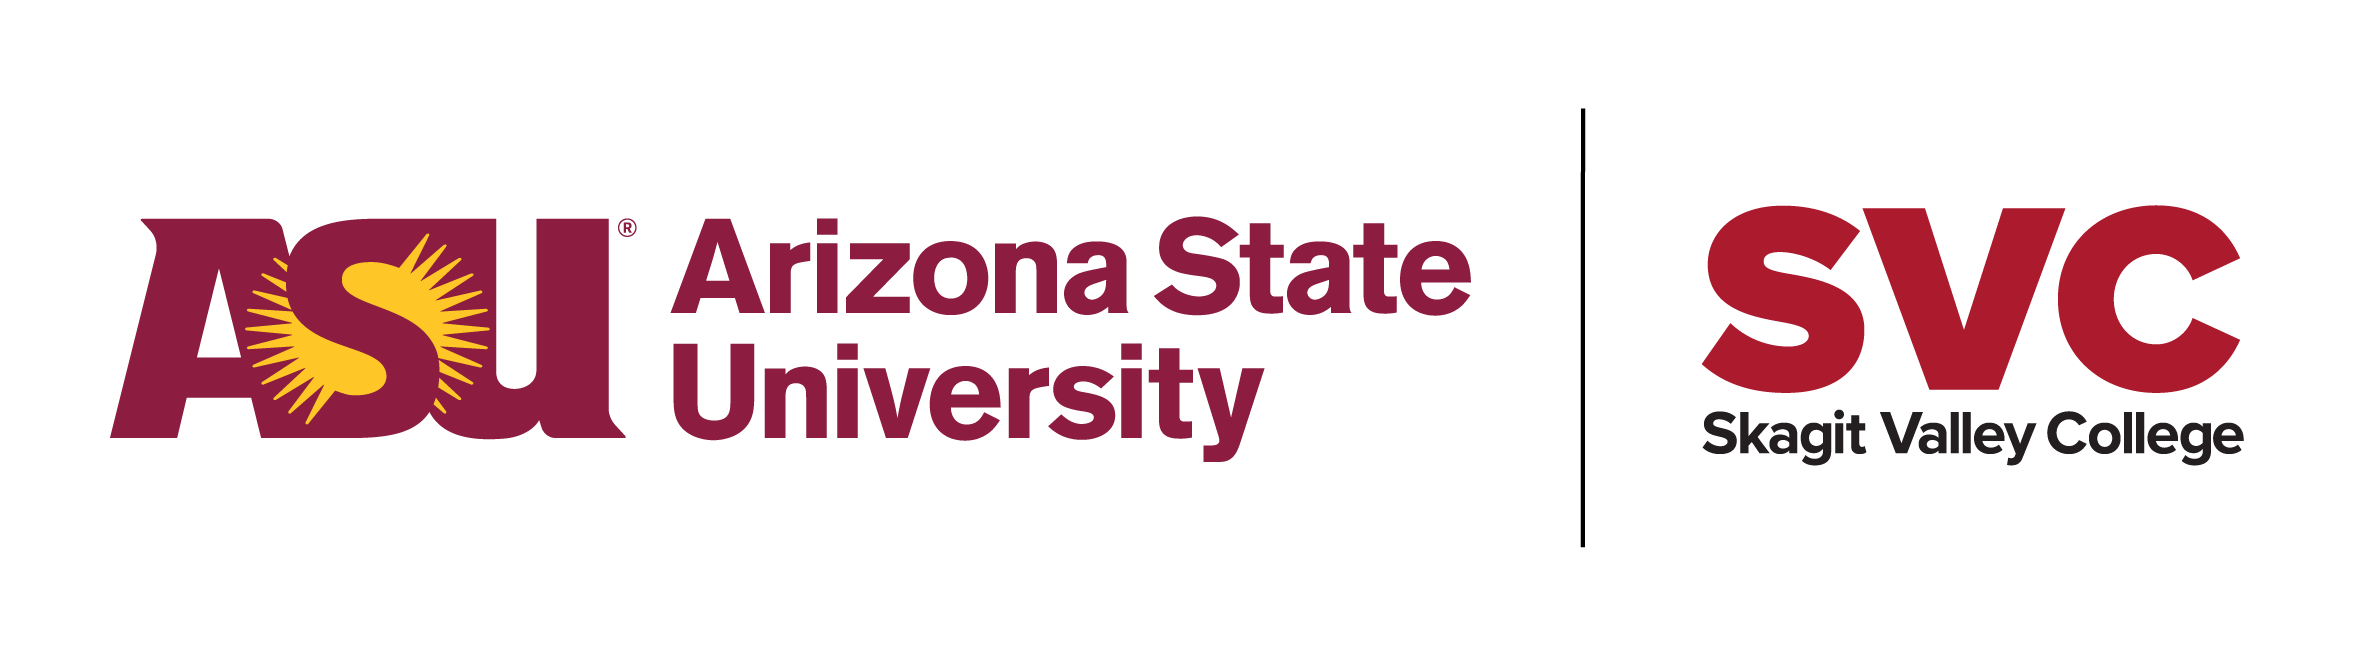 Arizona State University and Skagit Valley College collaboration